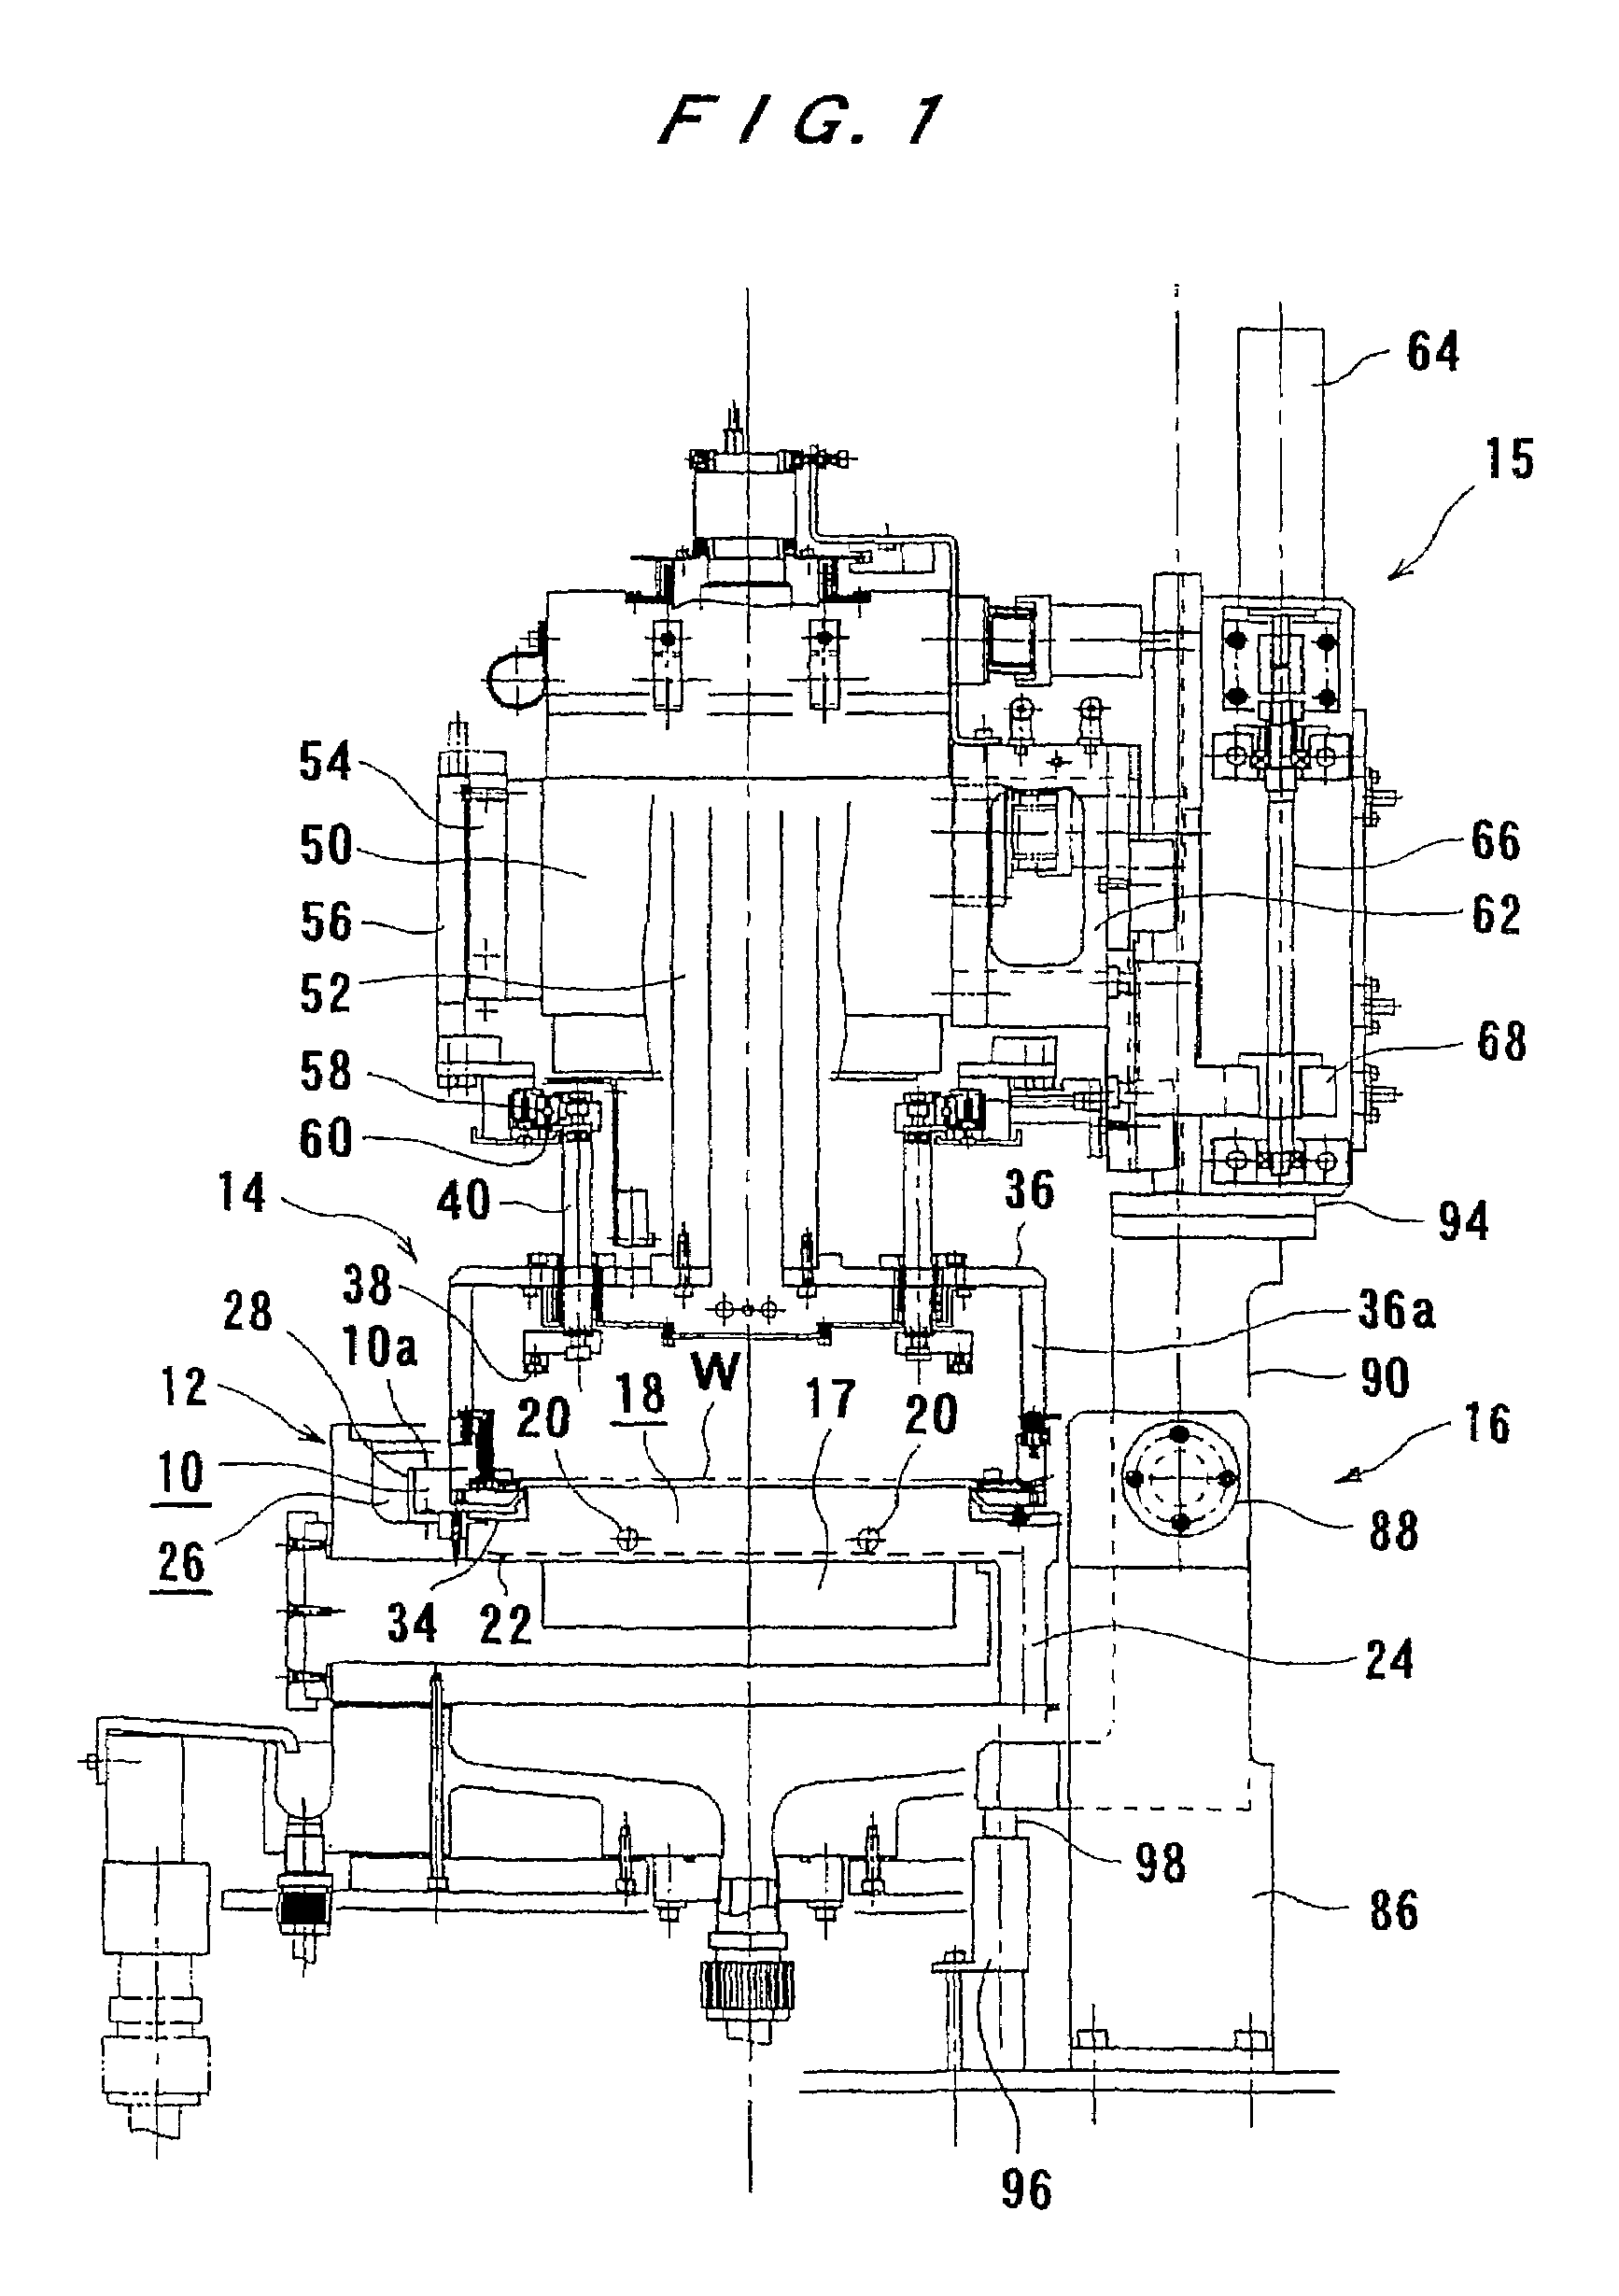 Plating apparatus and method